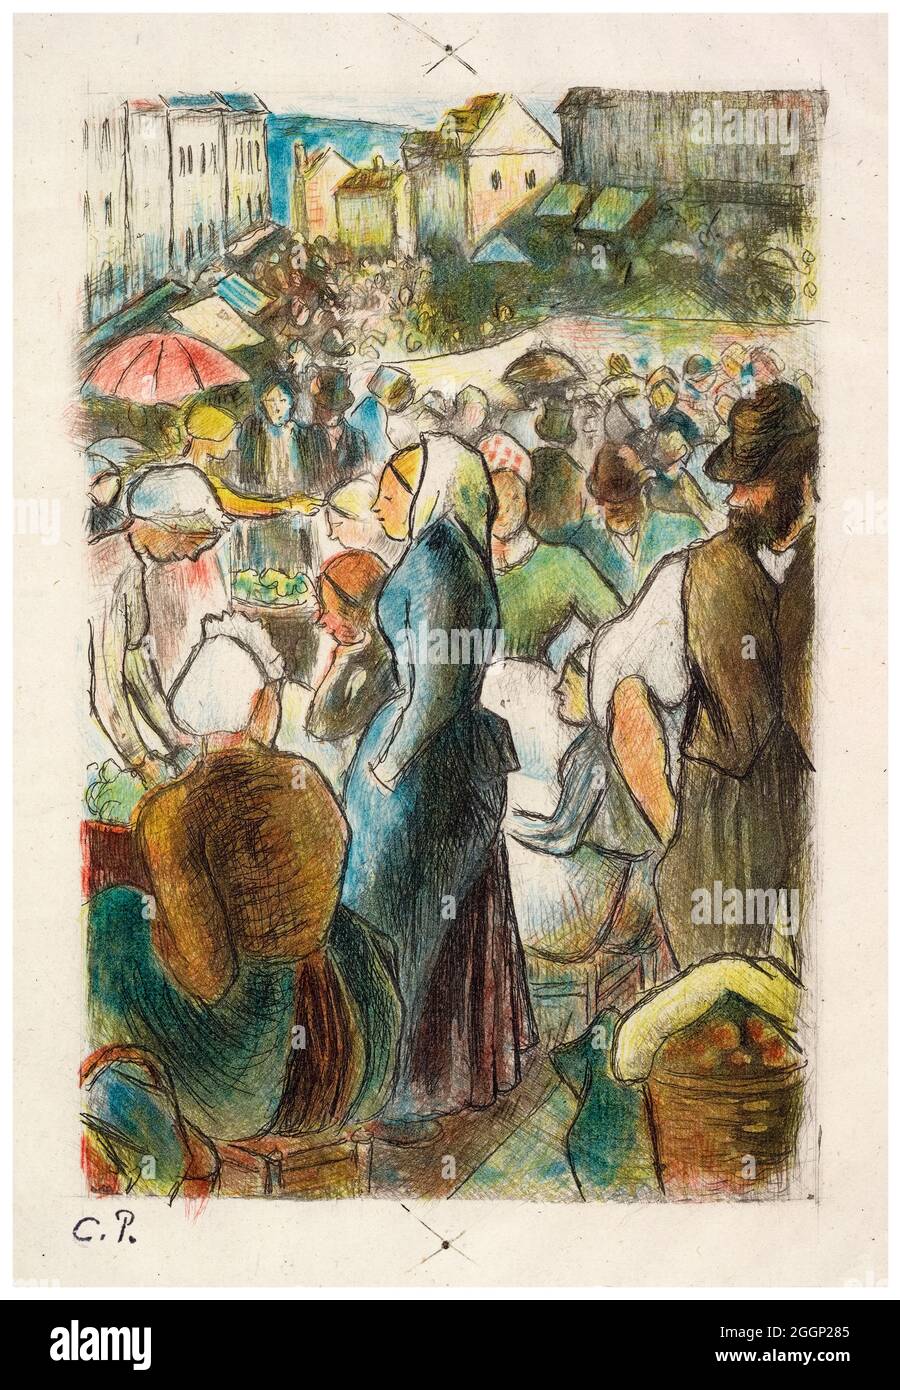 Camille Pissarro, The Market at Gisors: Rue Cappeville, drypoint printed in colour, 1894-1895 Stock Photo